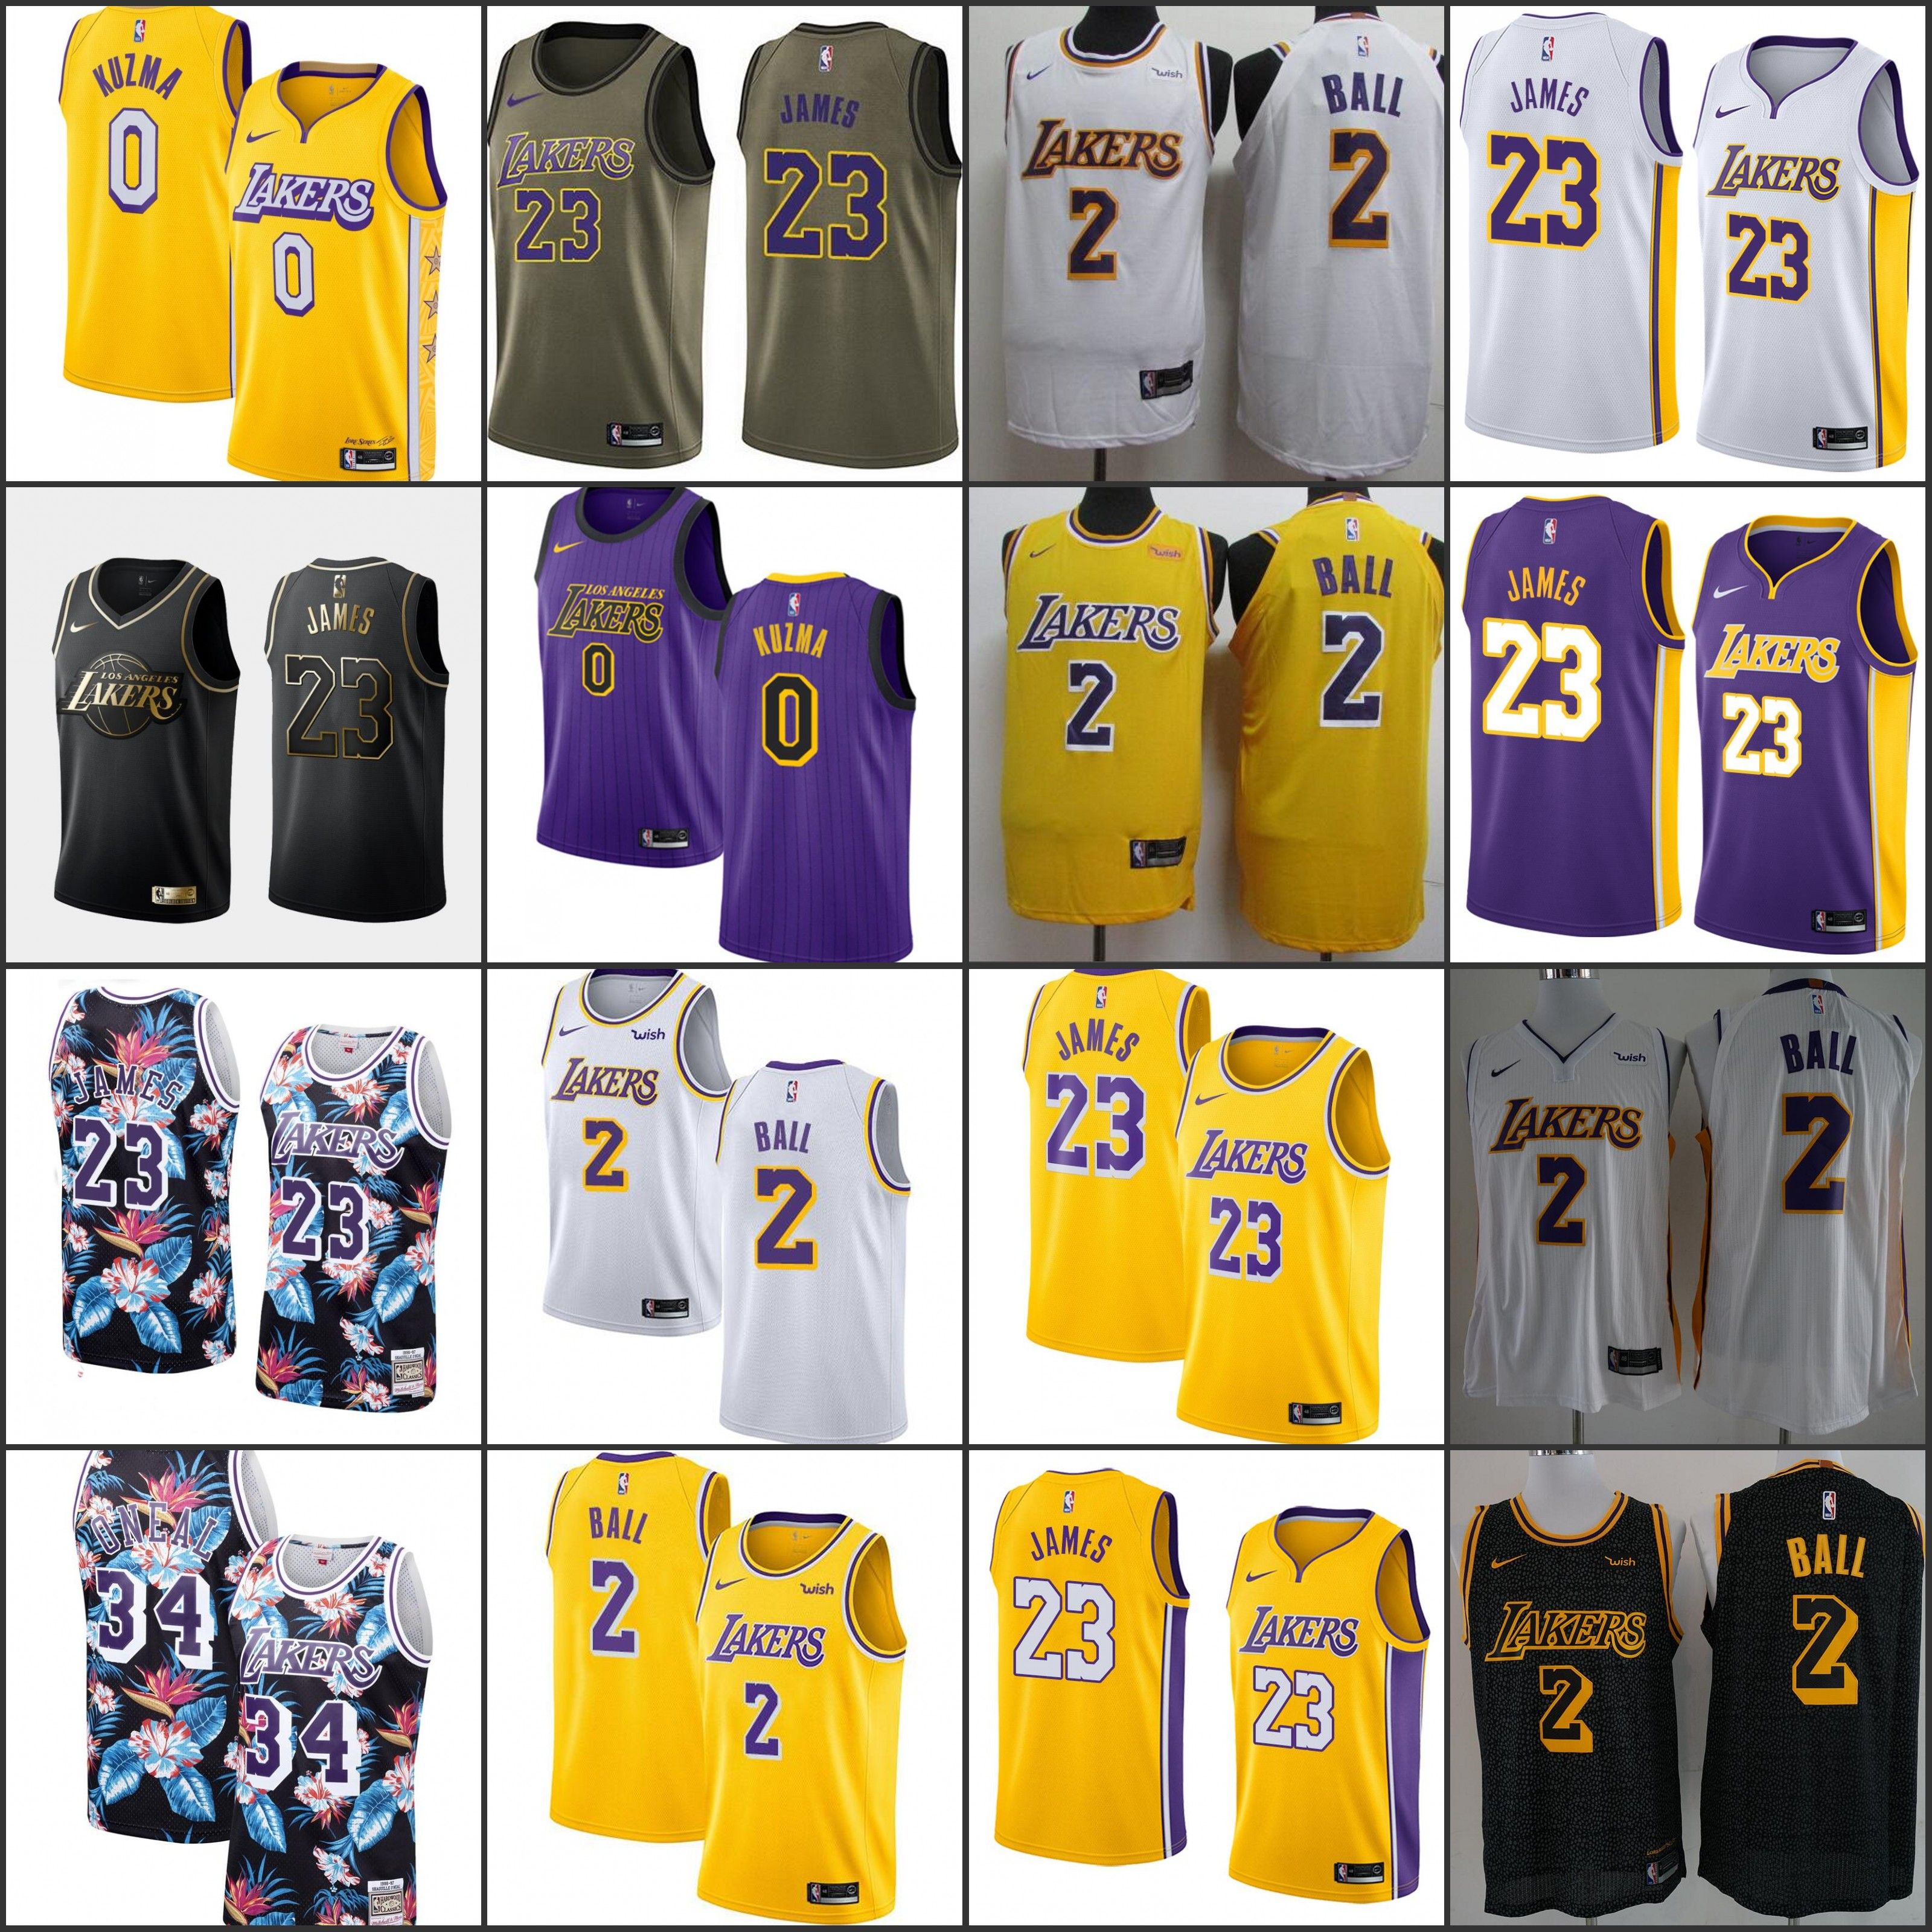 lakers jersey dhgate